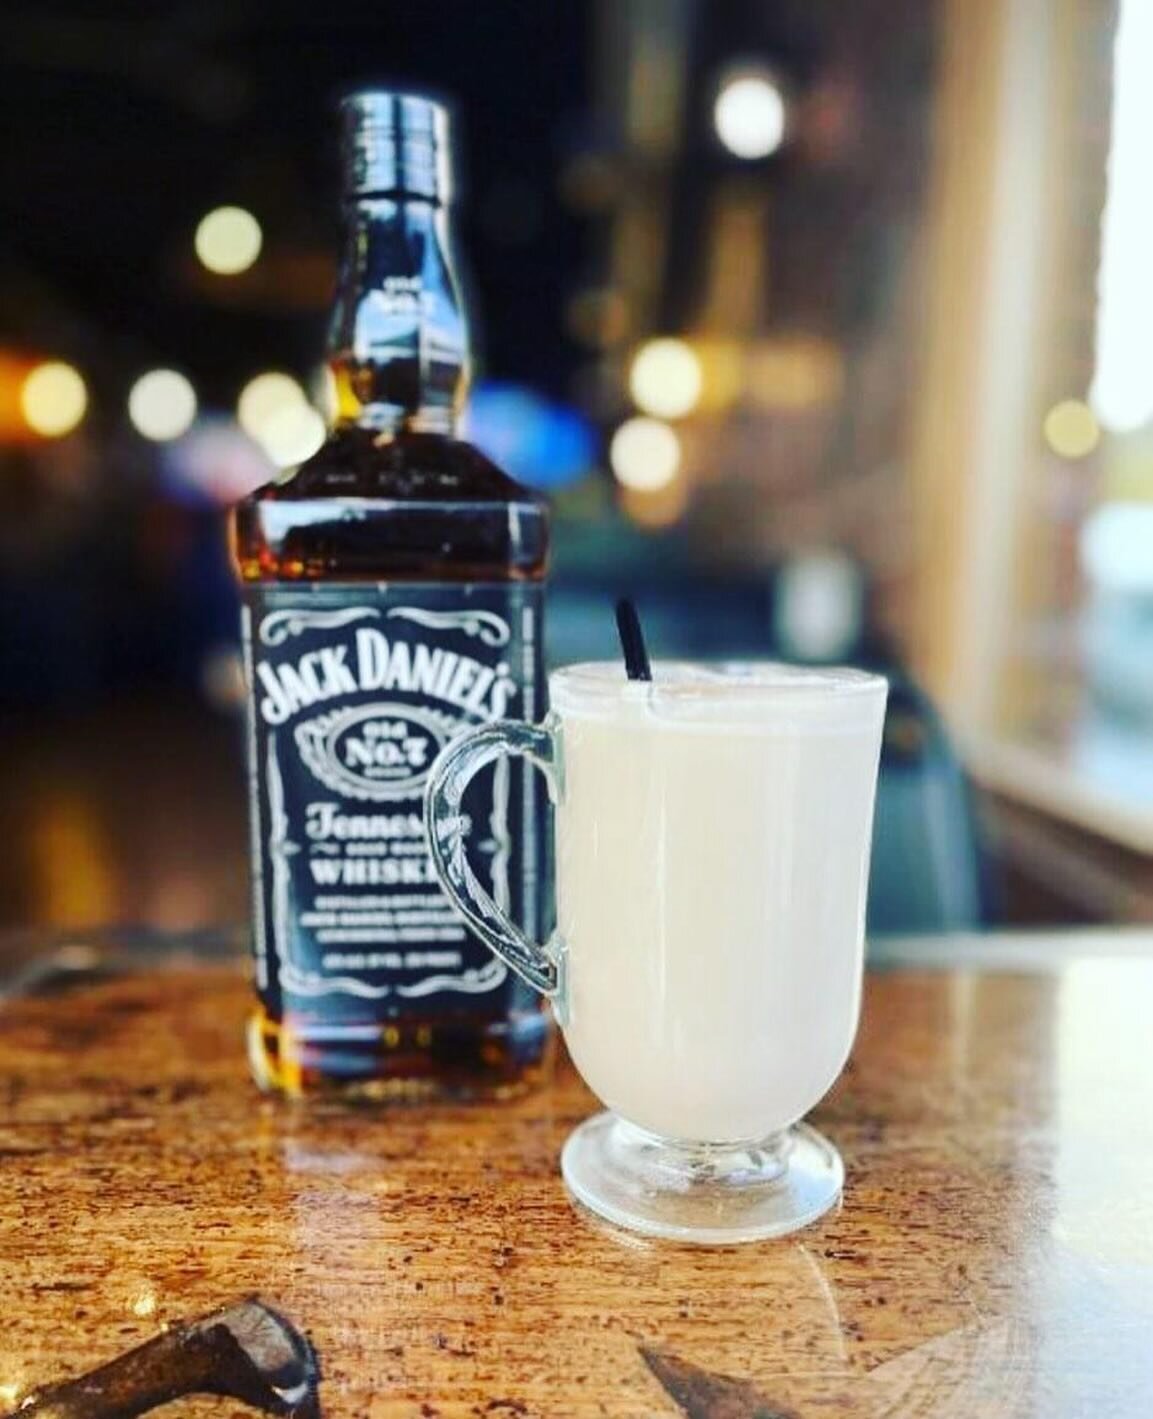 Warm up with a Tennessee Buttered Bourbon&mdash;Our house made salted caramel hot buttered rum mix with Jack Daniel&rsquo;s, $9. Happy Whiskey Tuesday, Train Wreckers!